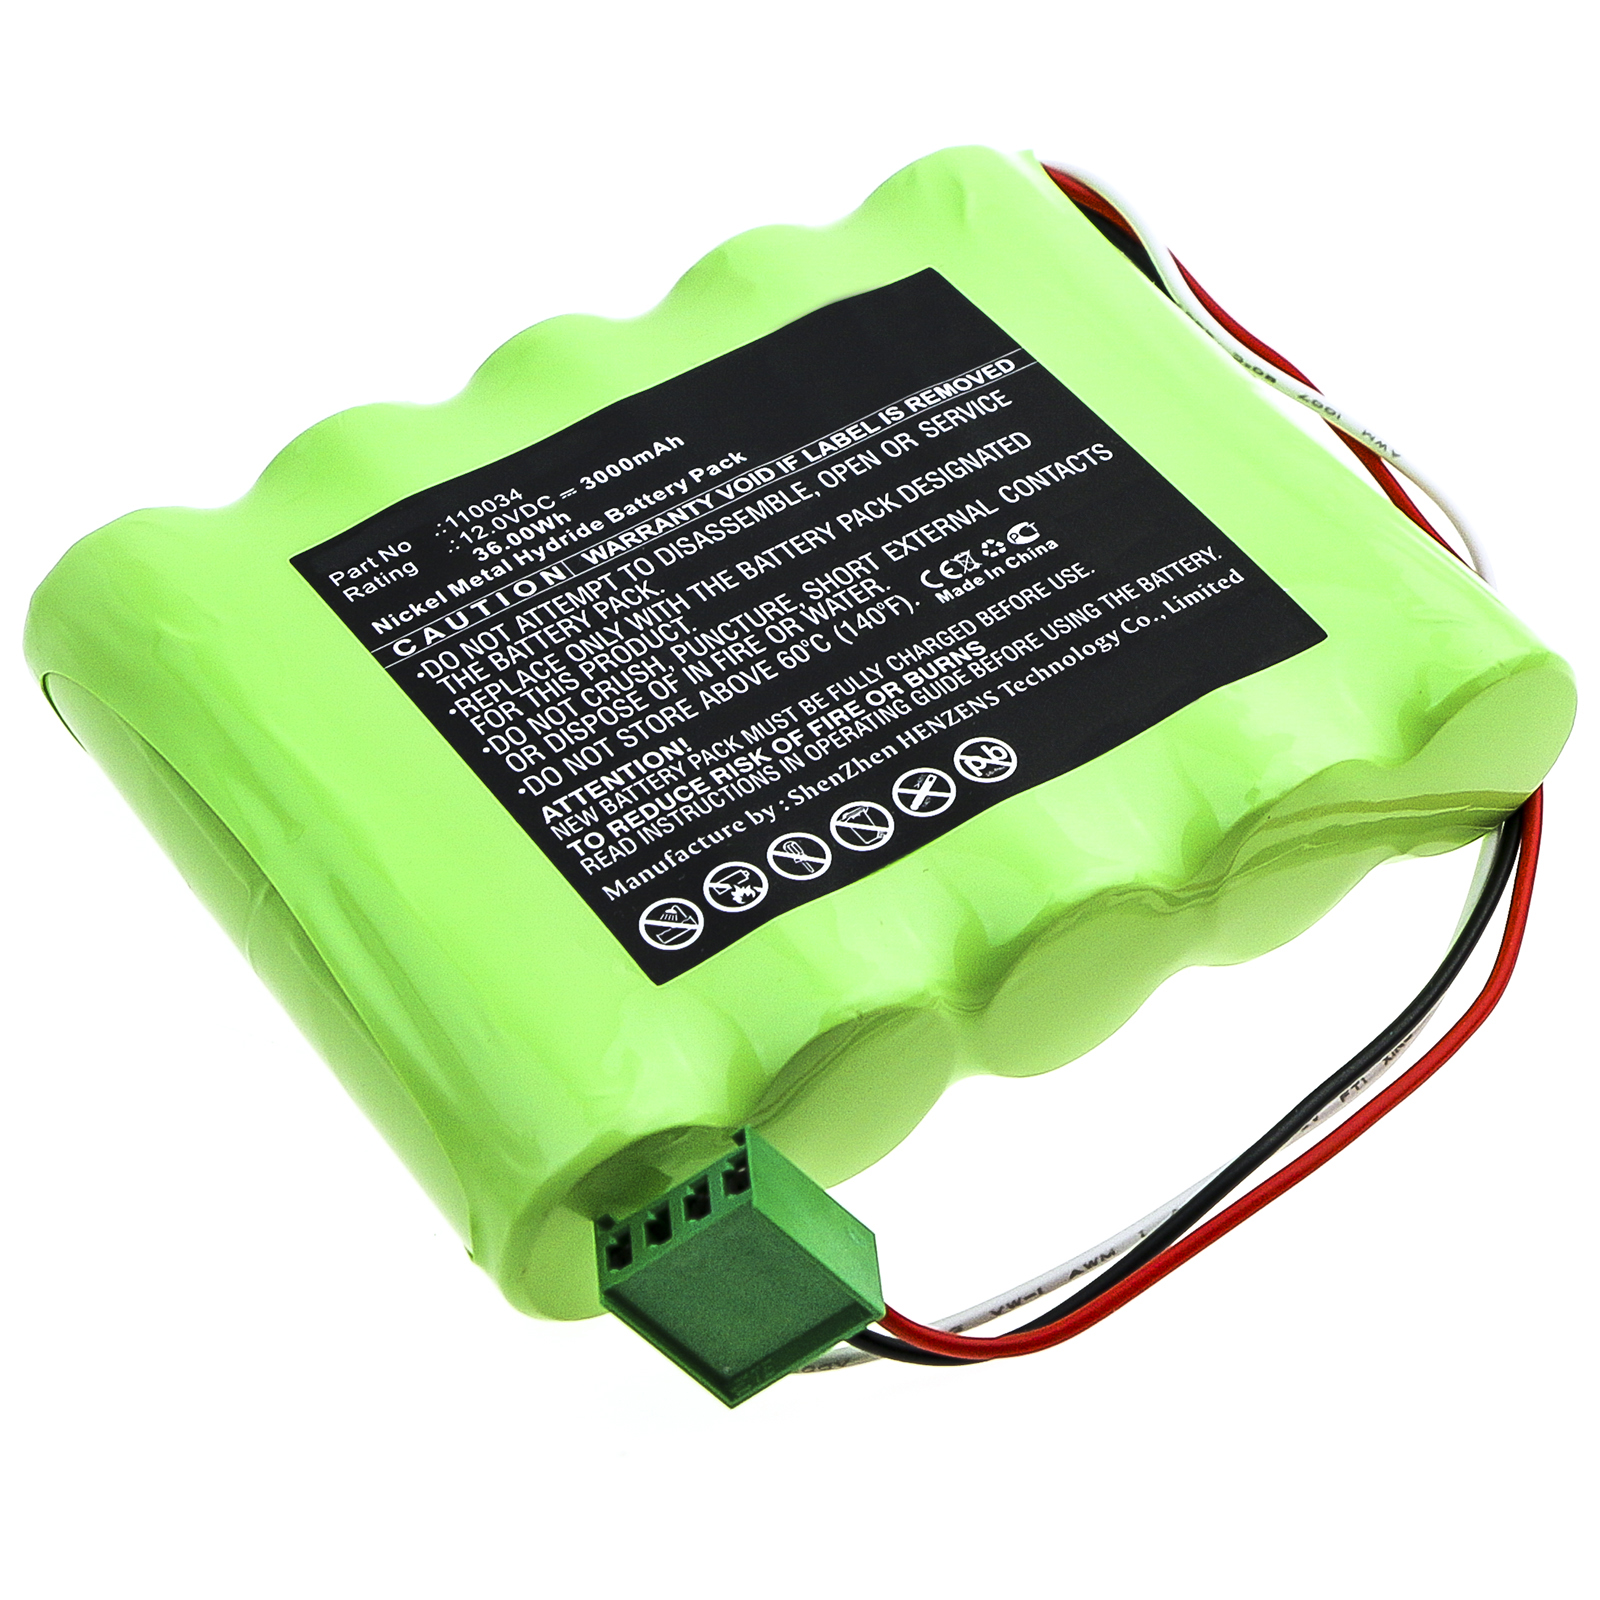 Synergy Digital Medical Battery, Compatible with Hellige 110034 Medical Battery (12V, Ni-MH, 3000mAh)